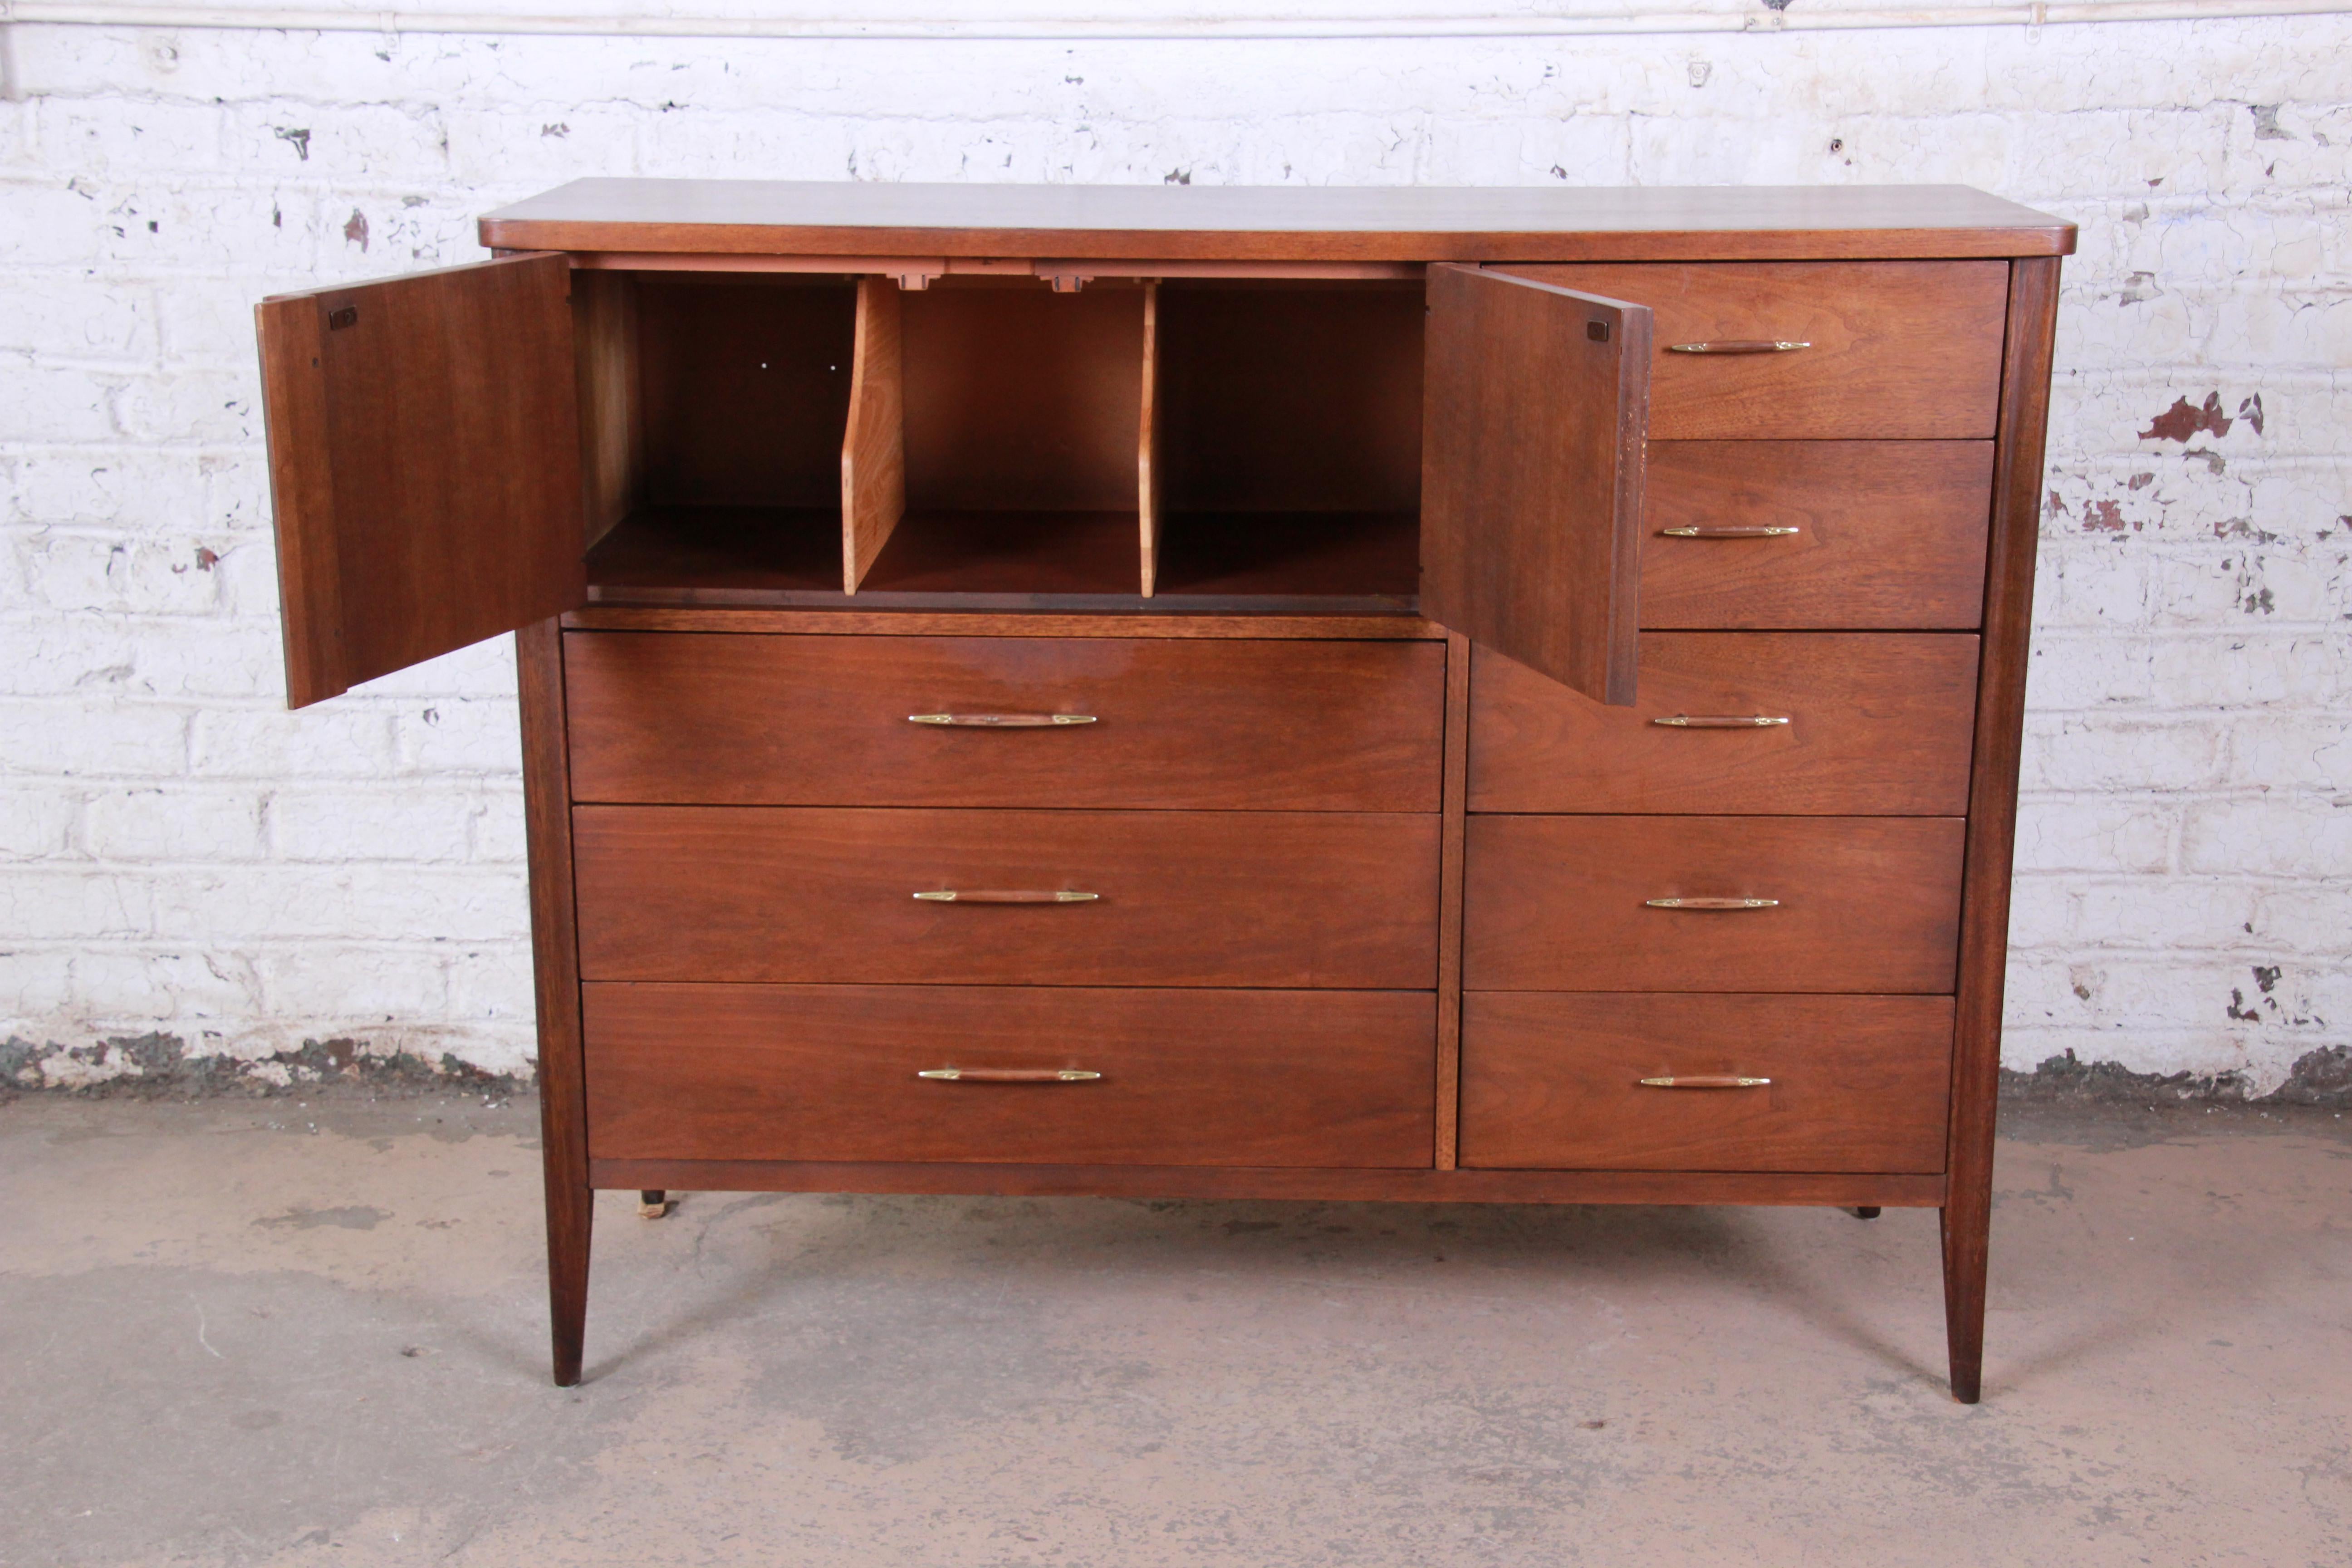 A rare and outstanding Mid-Century Modern walnut 